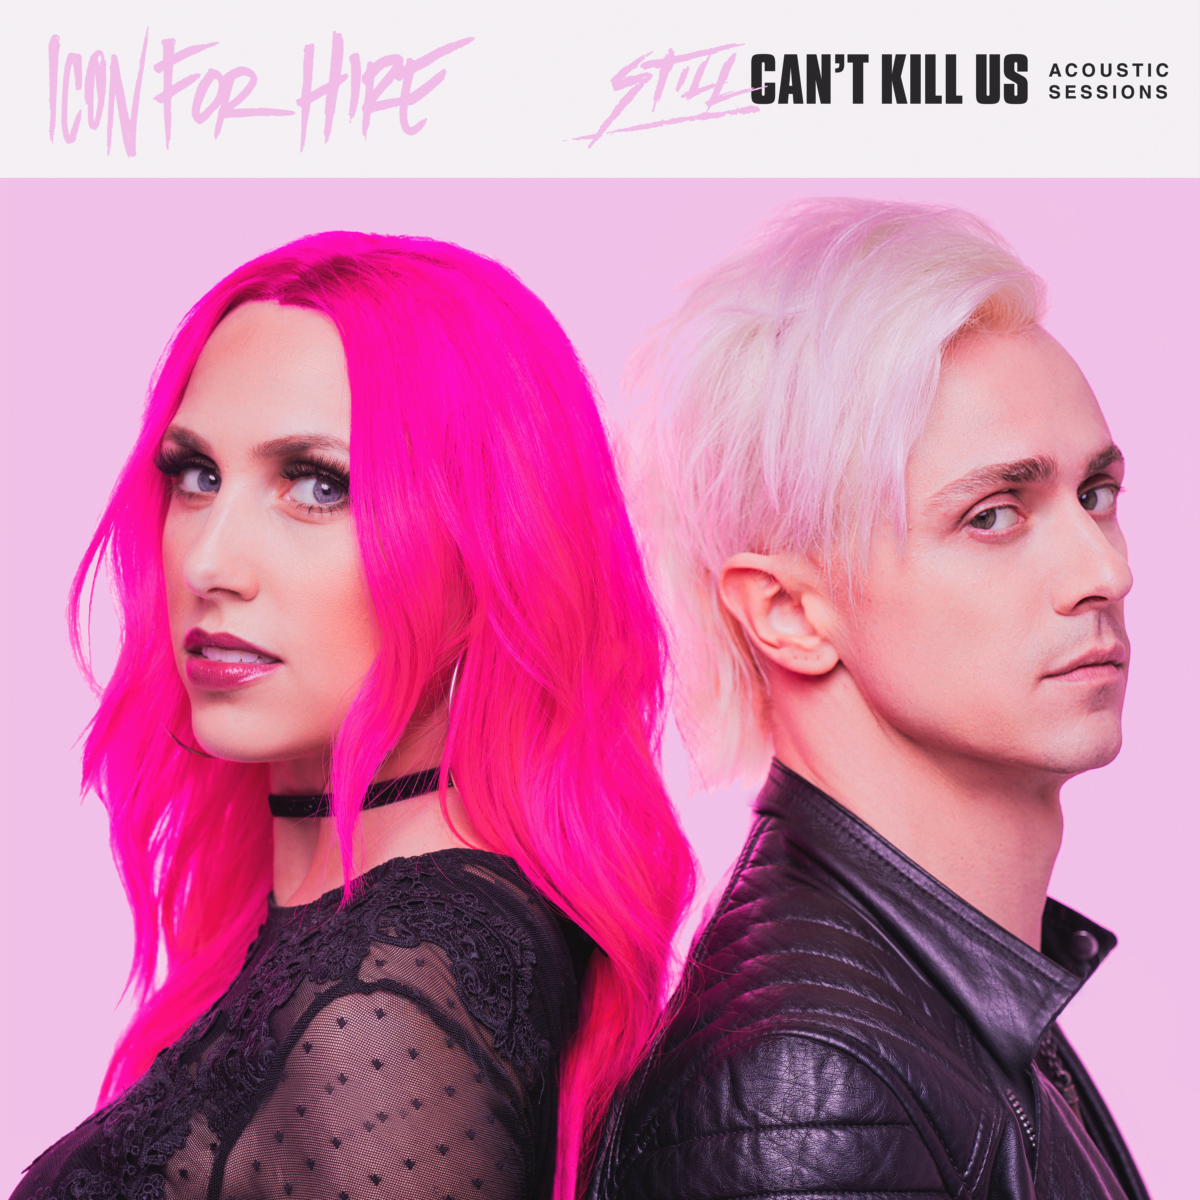 Still Can't Kill Us: Acoustic Sessions is HERE!